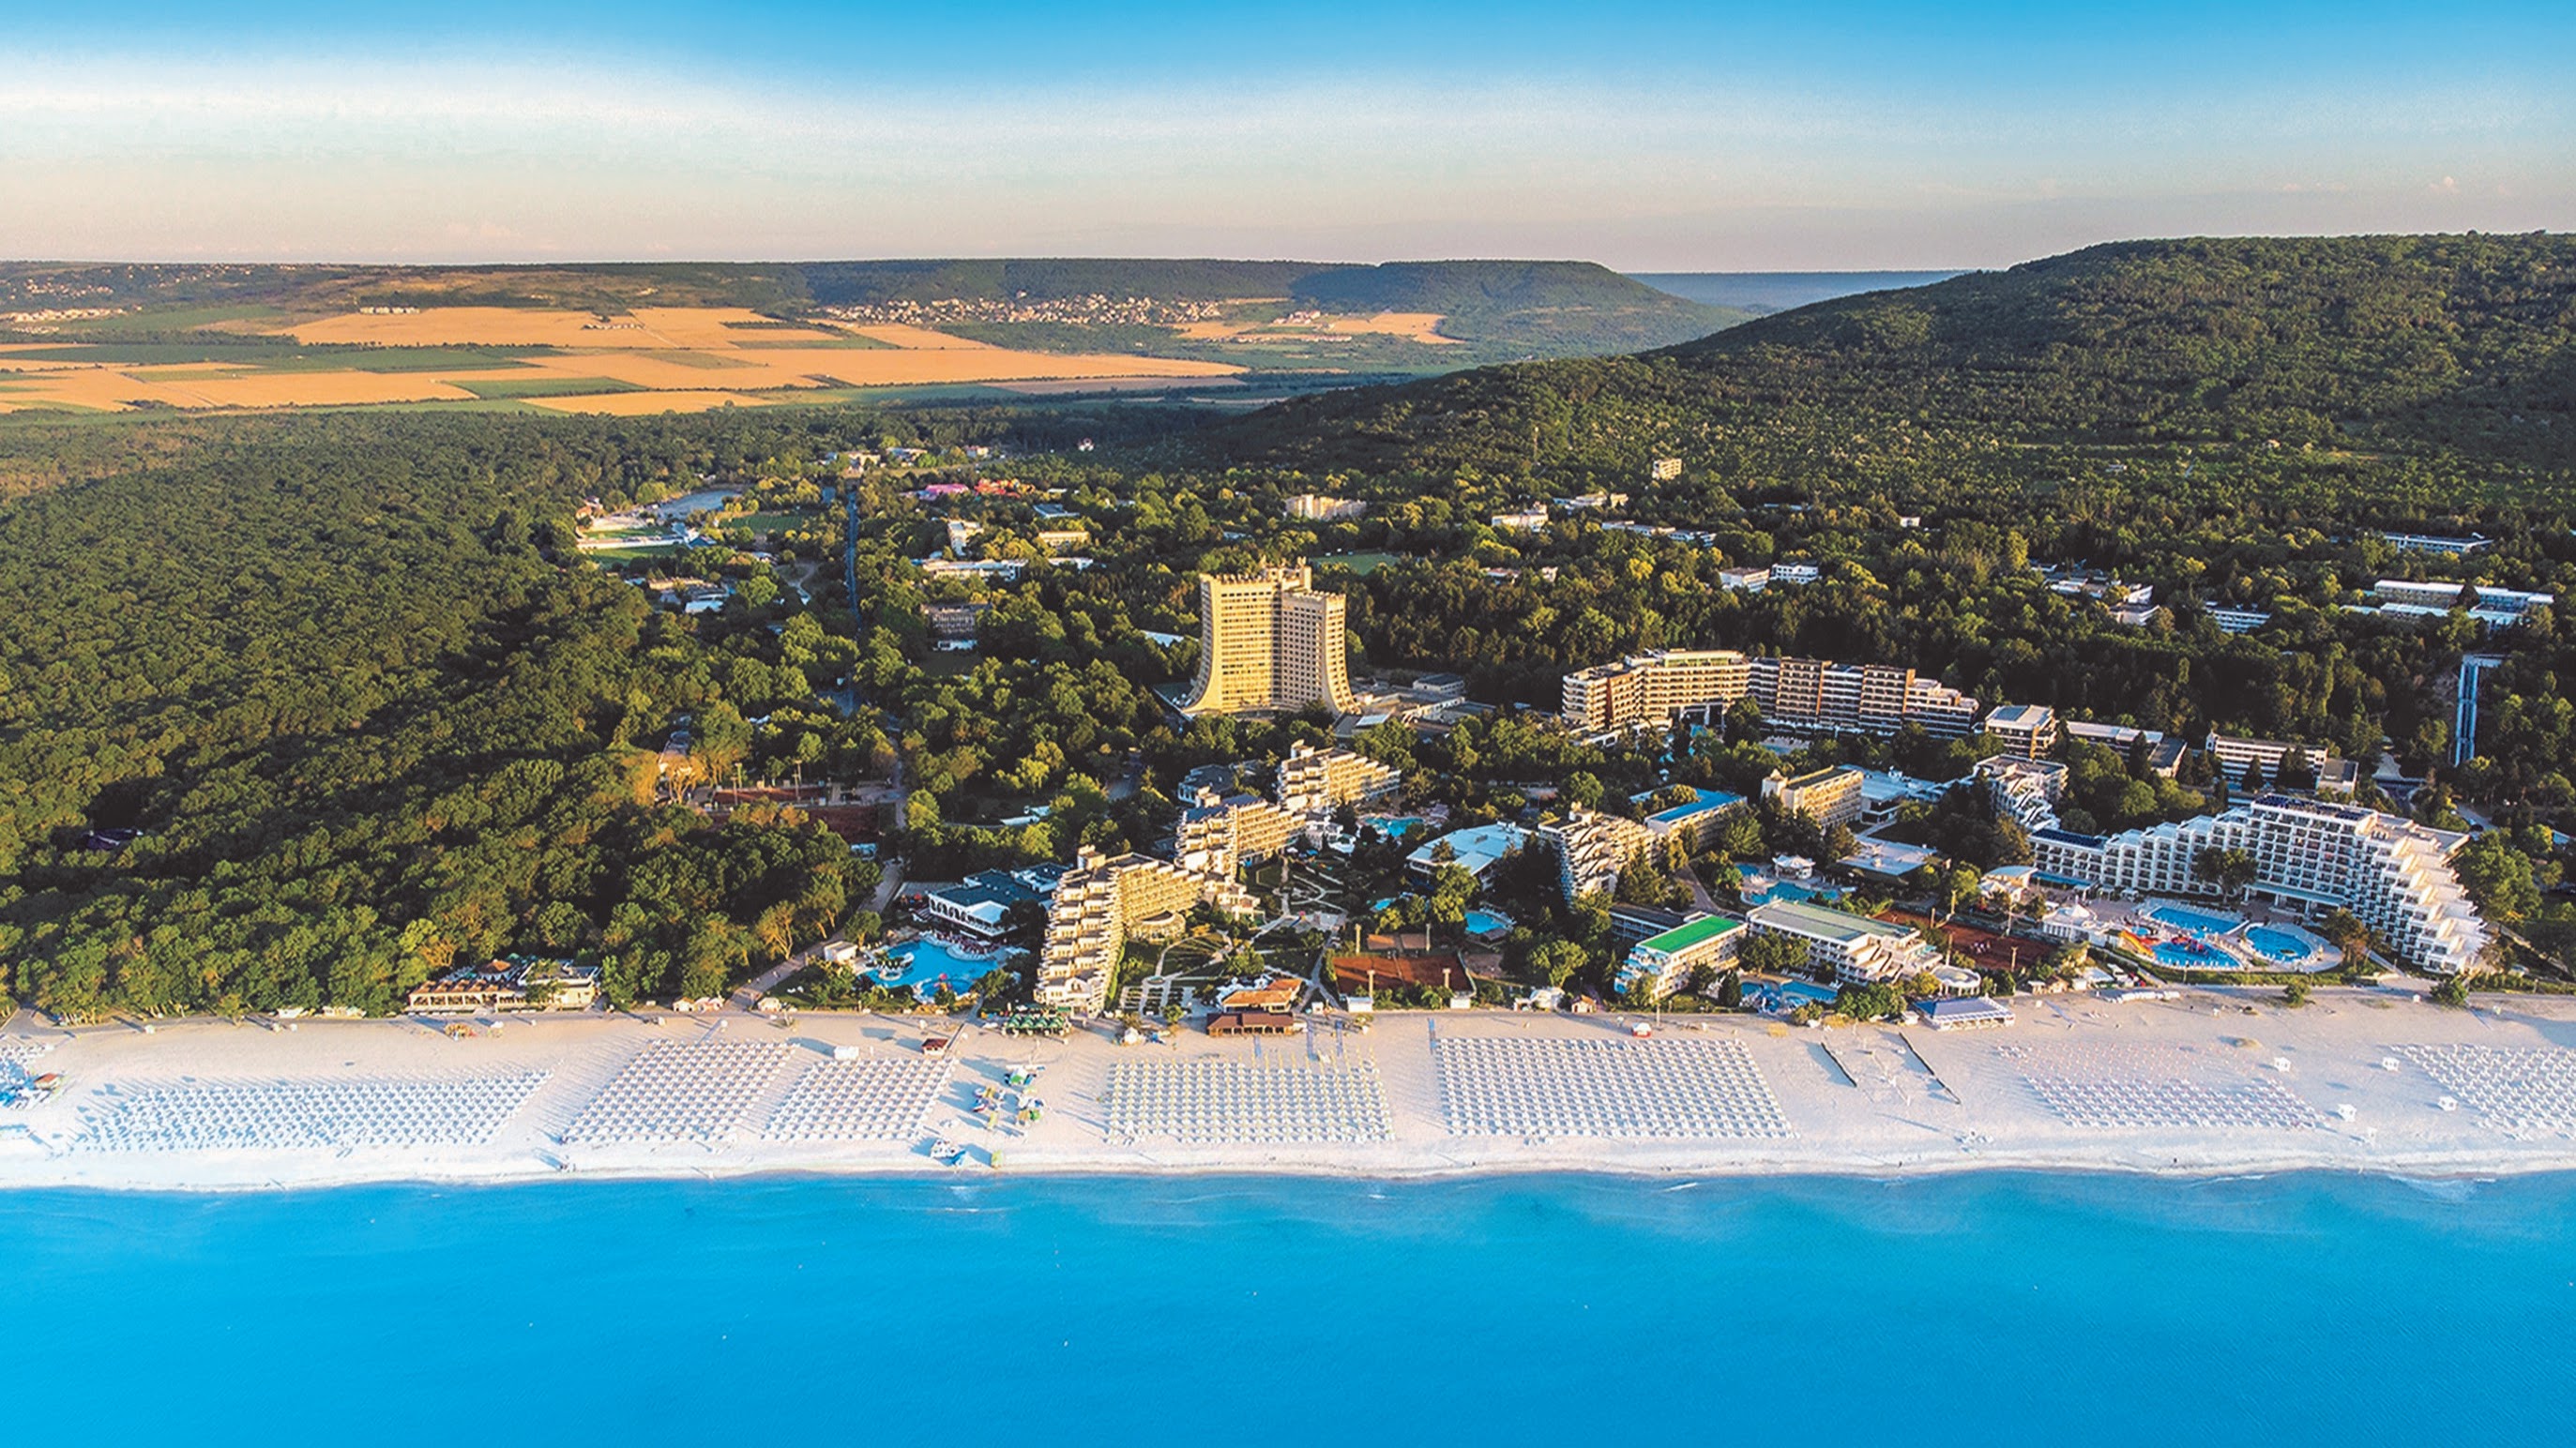 Picture of a place: Albena Resort